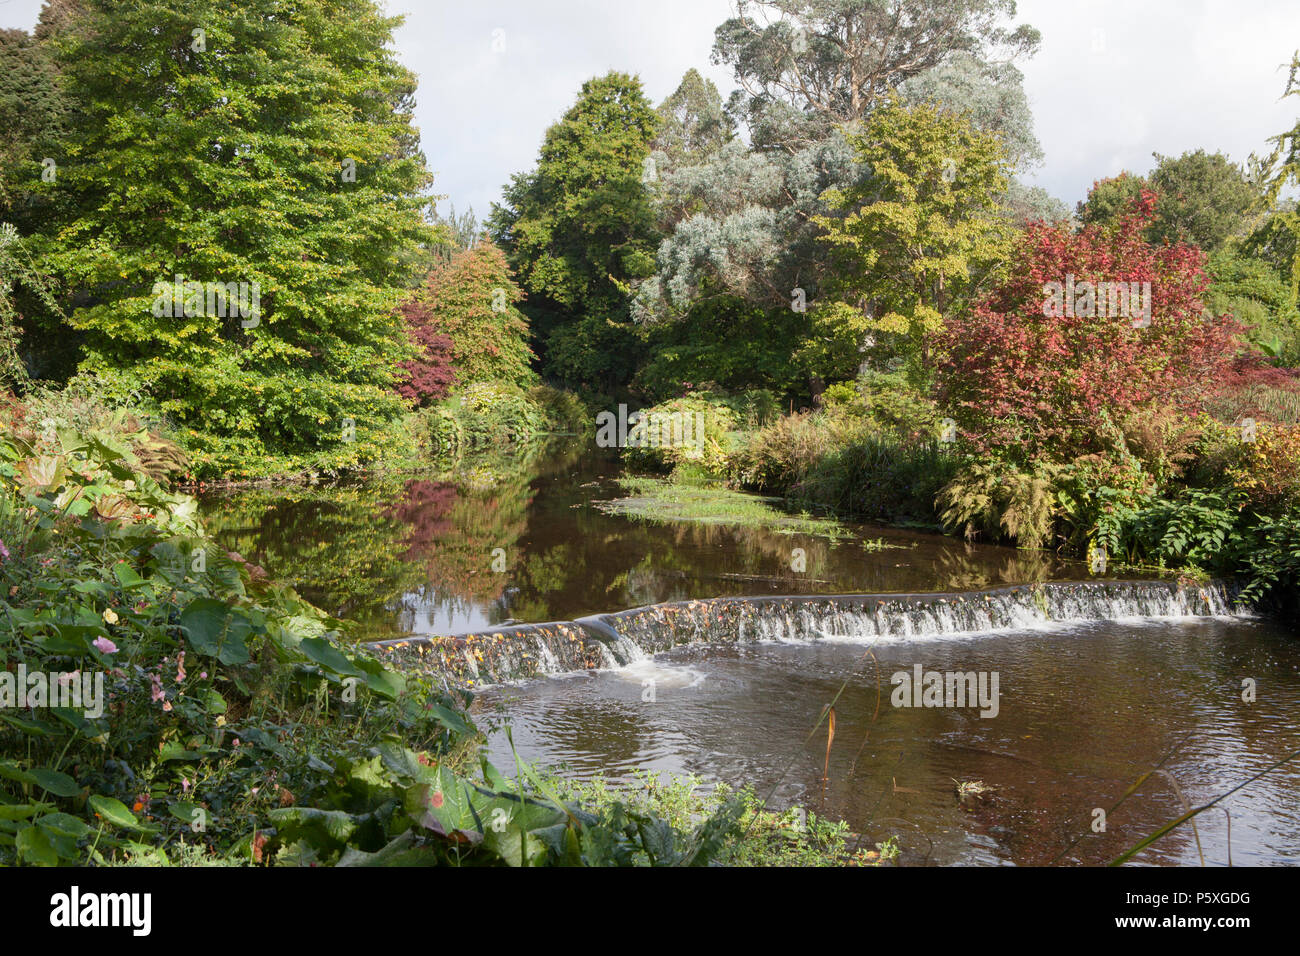 The River Vartry runs through Mount Usher Gardens in County Wicklow which is considered one of Ireland's finest gardens and arboretums Stock Photo